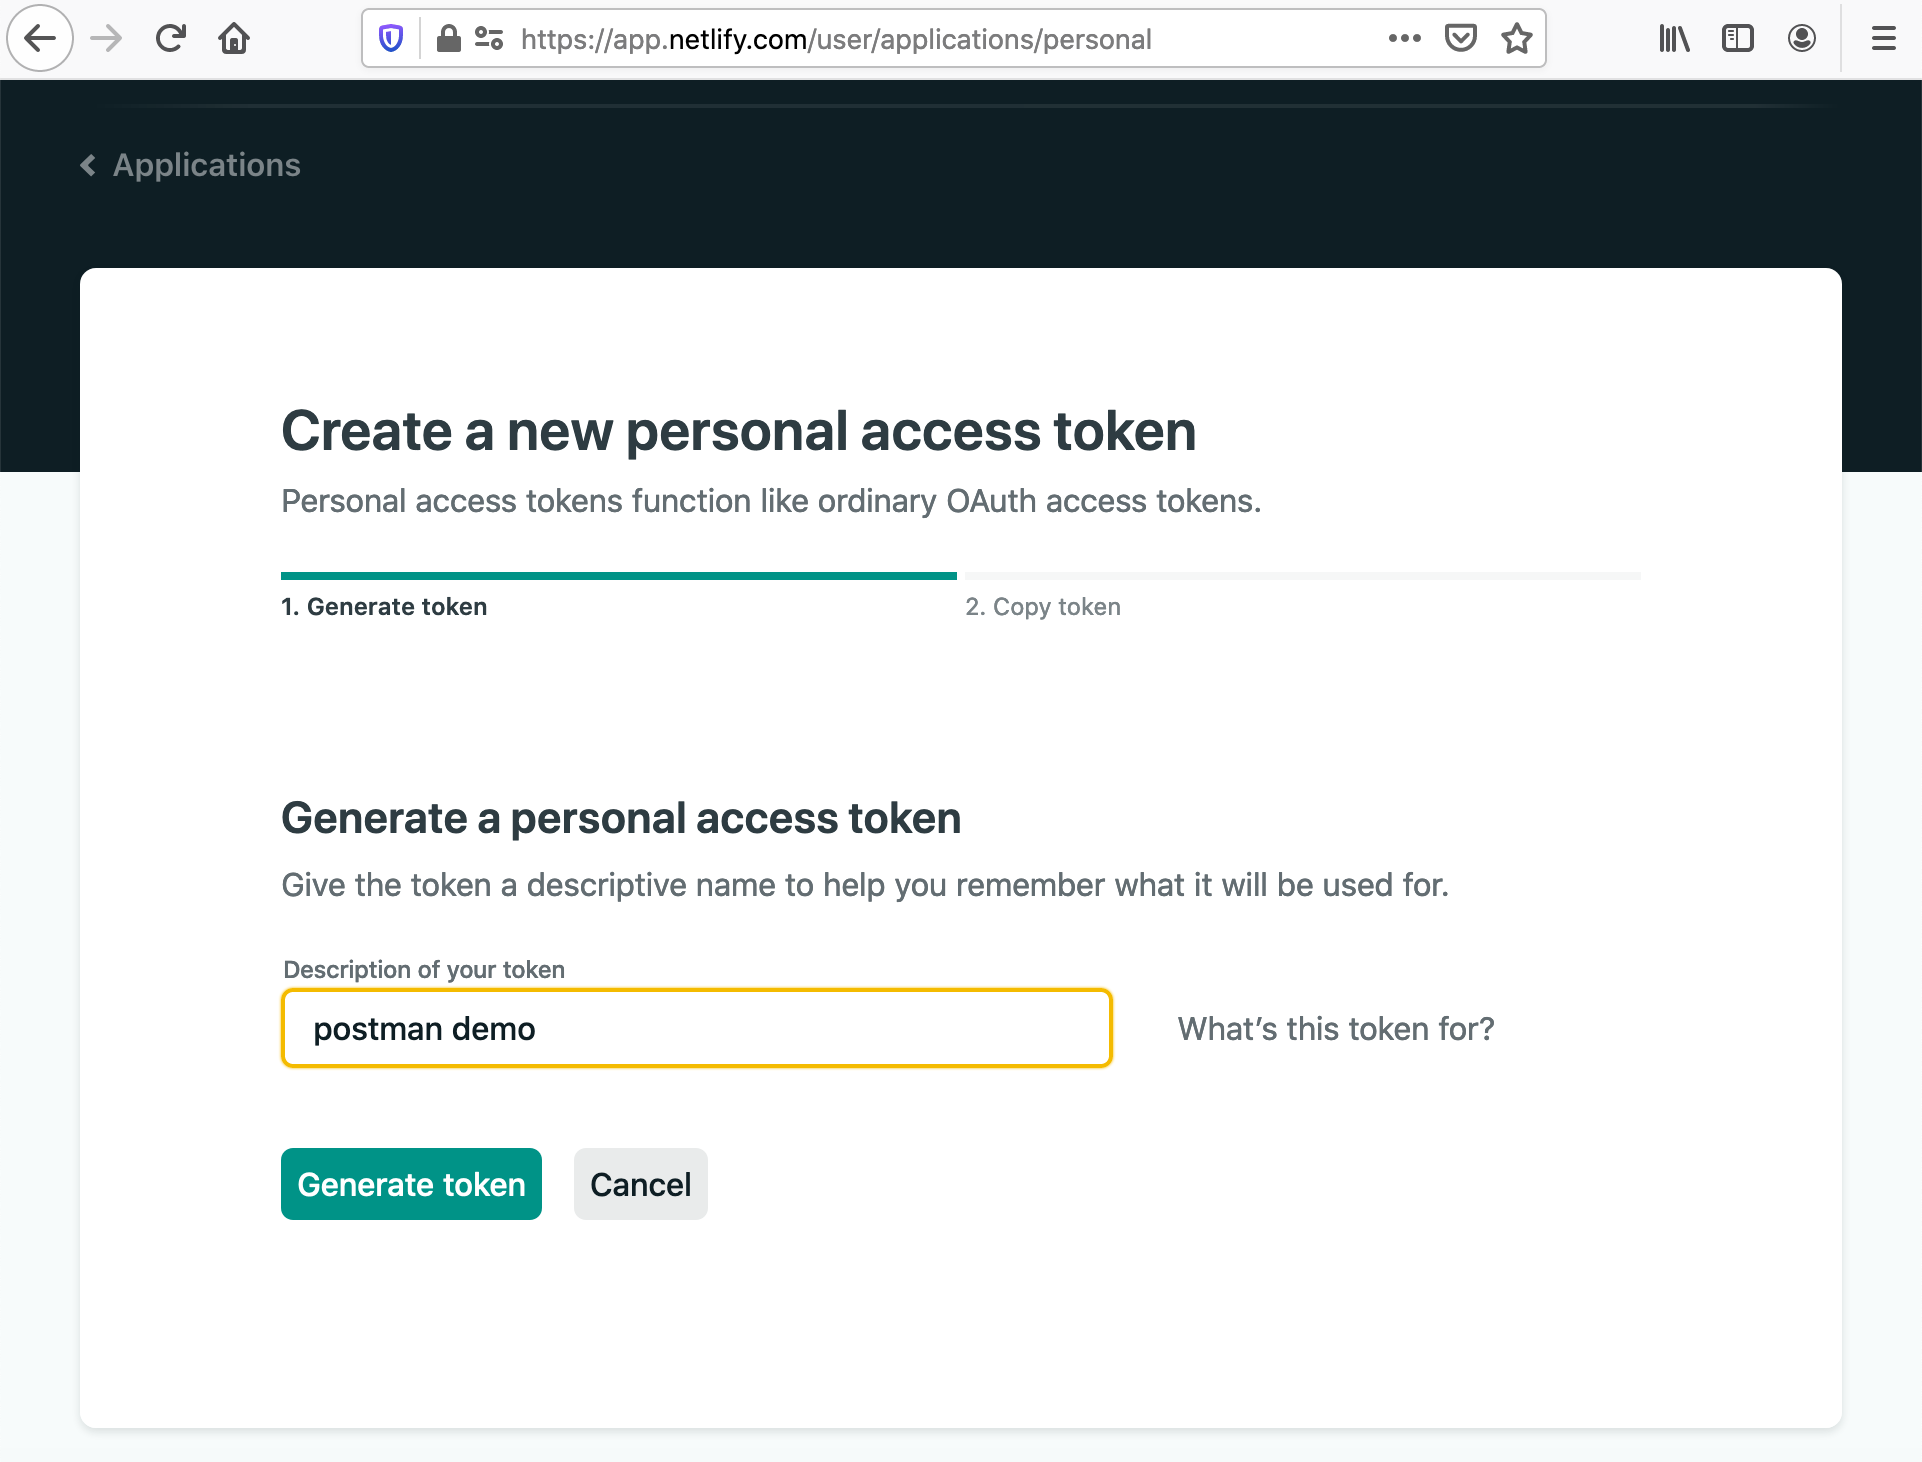 Screenshot of https://app.netlify.com/user/applications/personal showing how to generate your personal access token